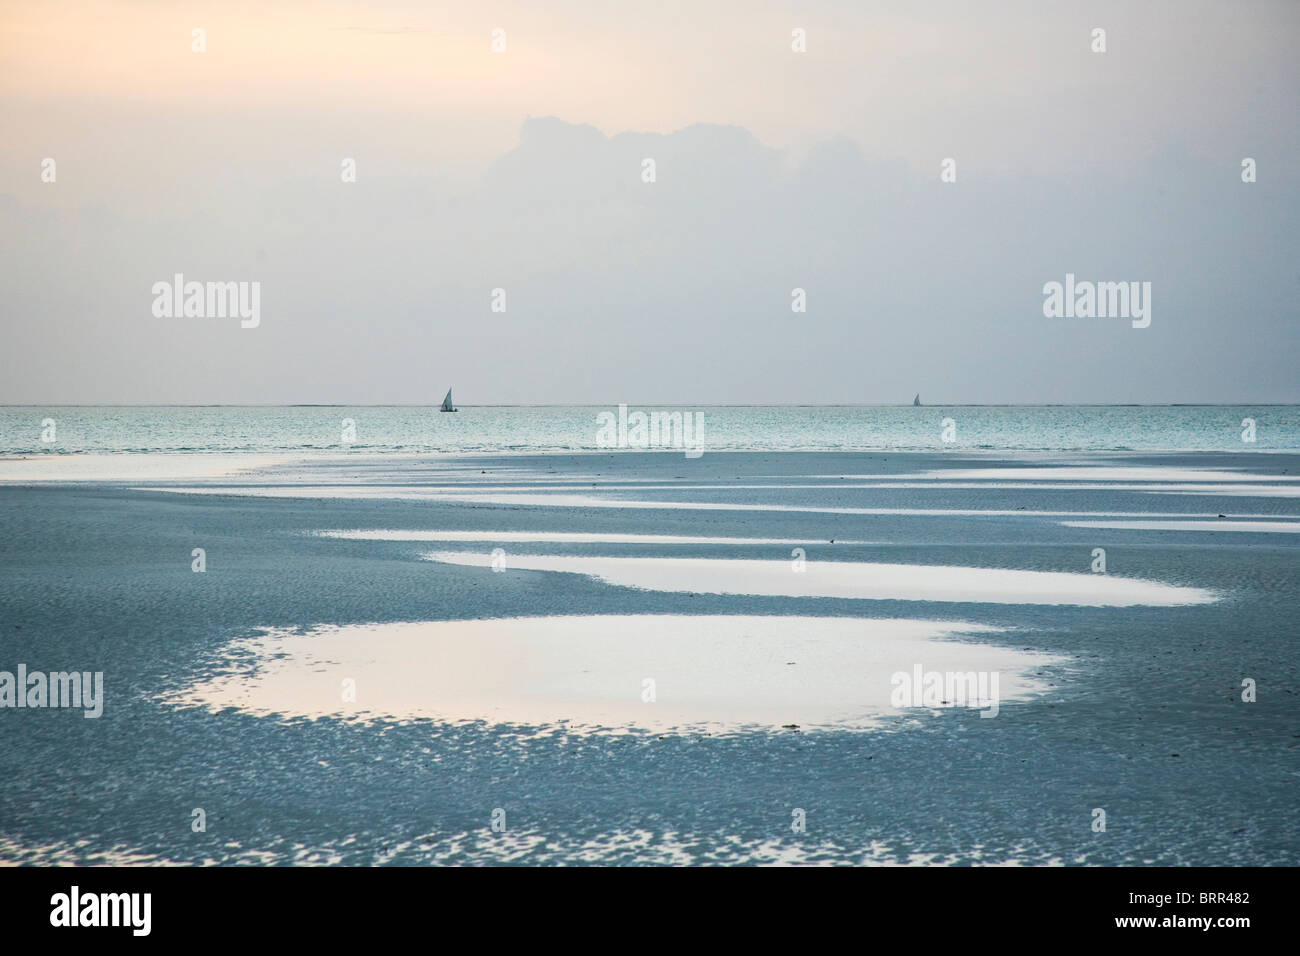 Deserted island beach at dawn with distant dhows on the sea Stock Photo